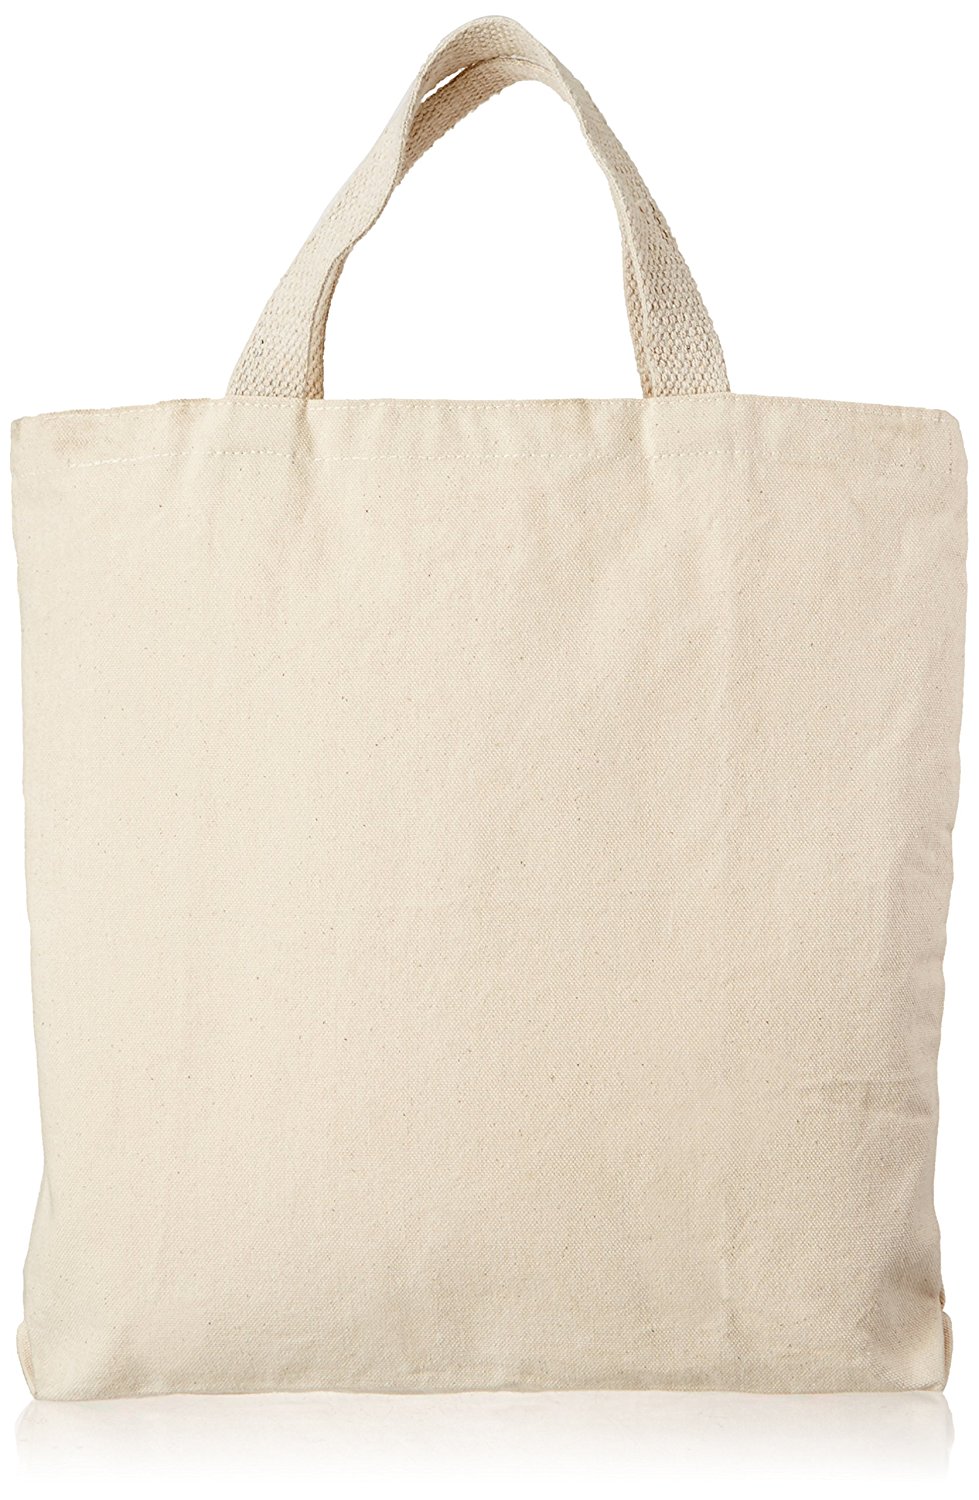 Wear’m™ Canvas :: Bags & Totes :: Canvas Zipper Tote 13.5x13.5x2in | Natural